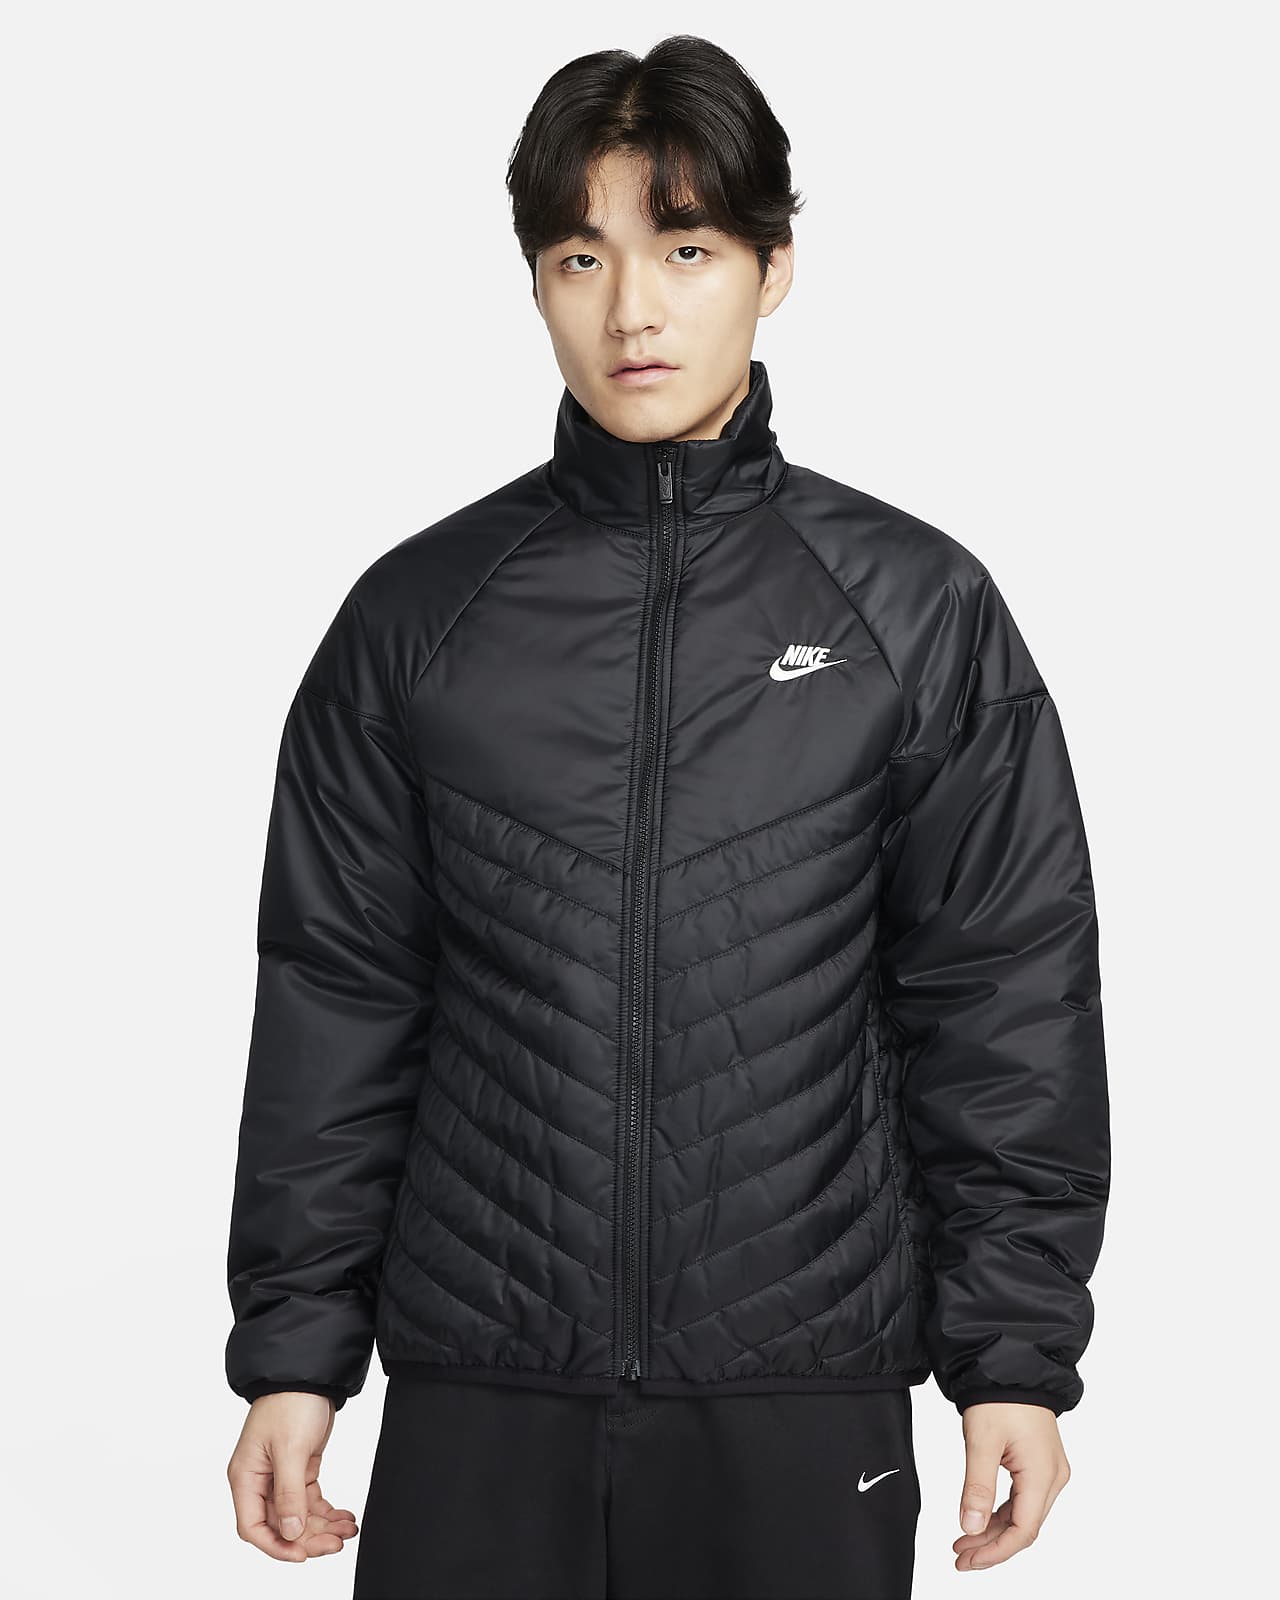 Nike Sportswear Windrunner Men's Therma-FIT Midweight Puffer